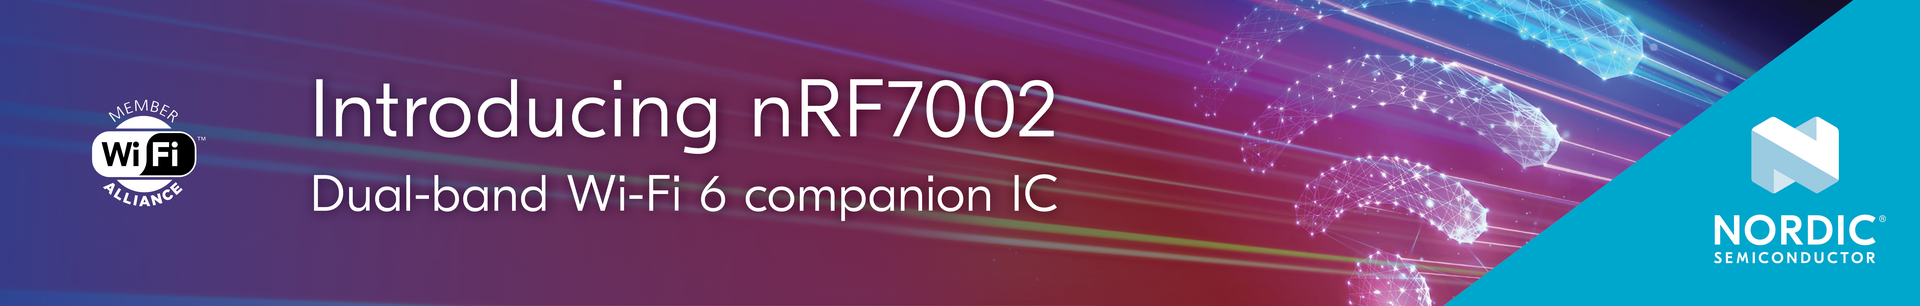 Introducing nRF7002 - Nordic´s first Wi-Fi IC